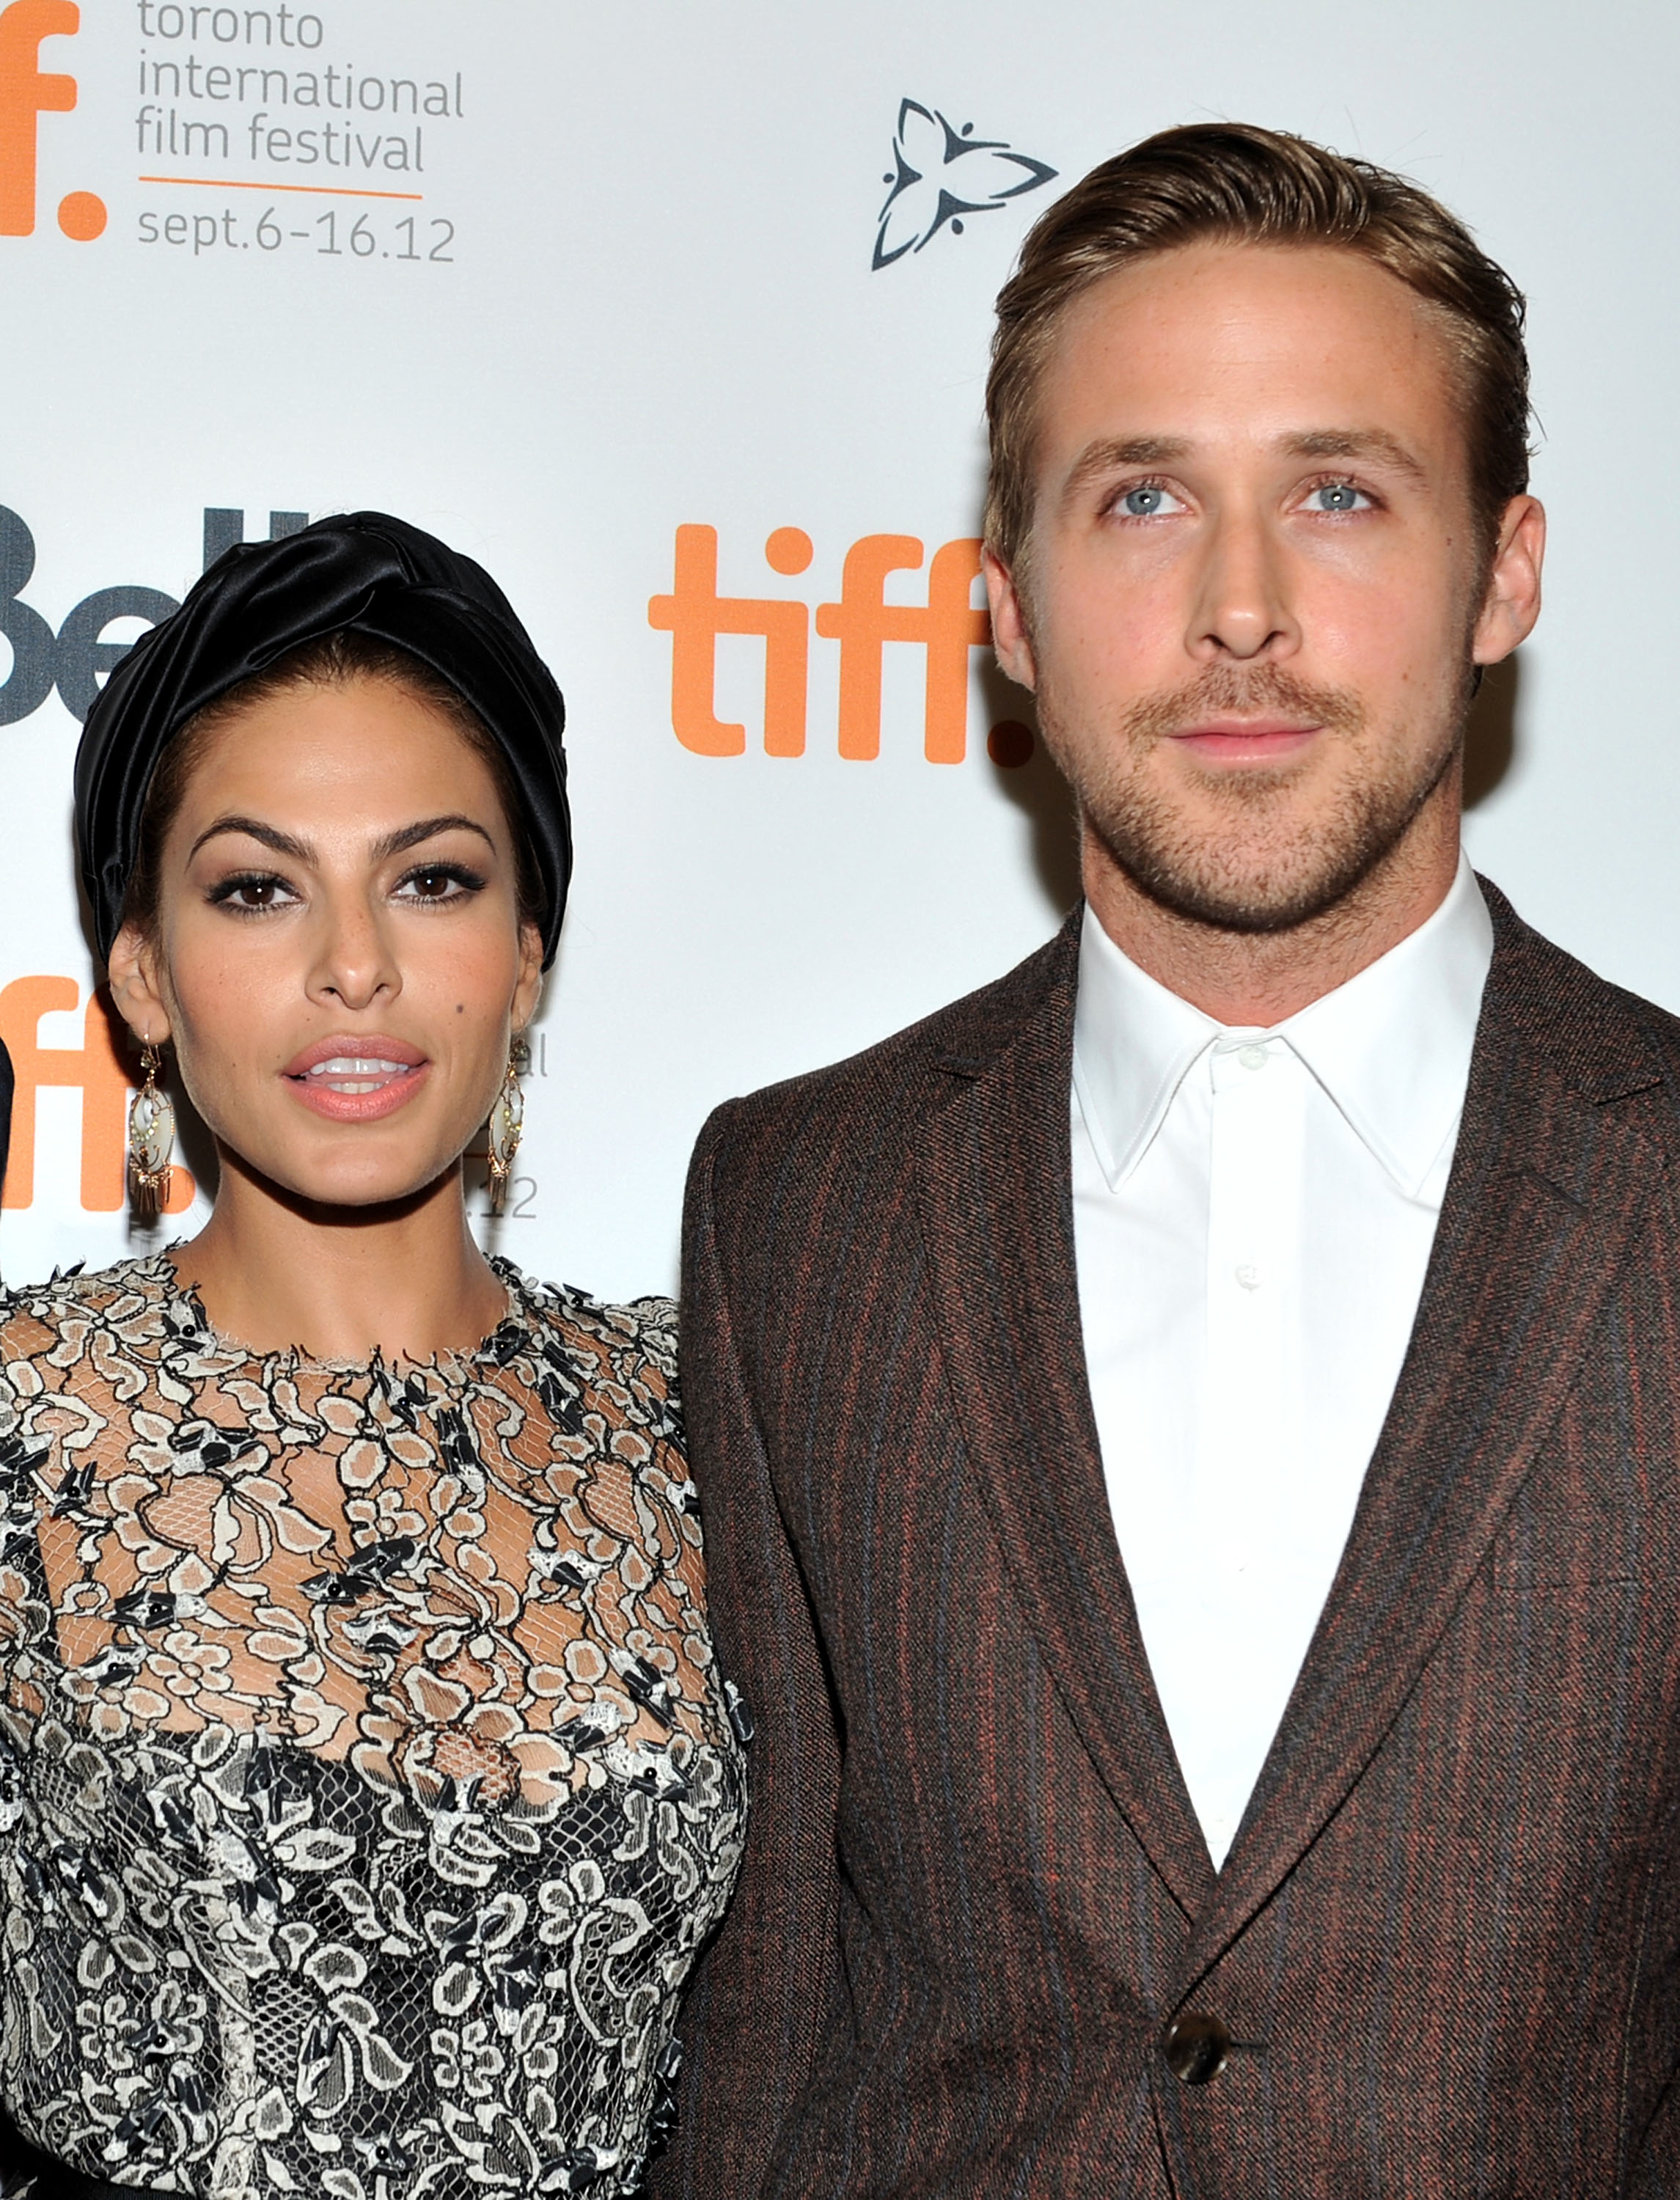 Eva Mendes in a lace dress stands with Ryan Gosling in a patterned suit at the TIFF event